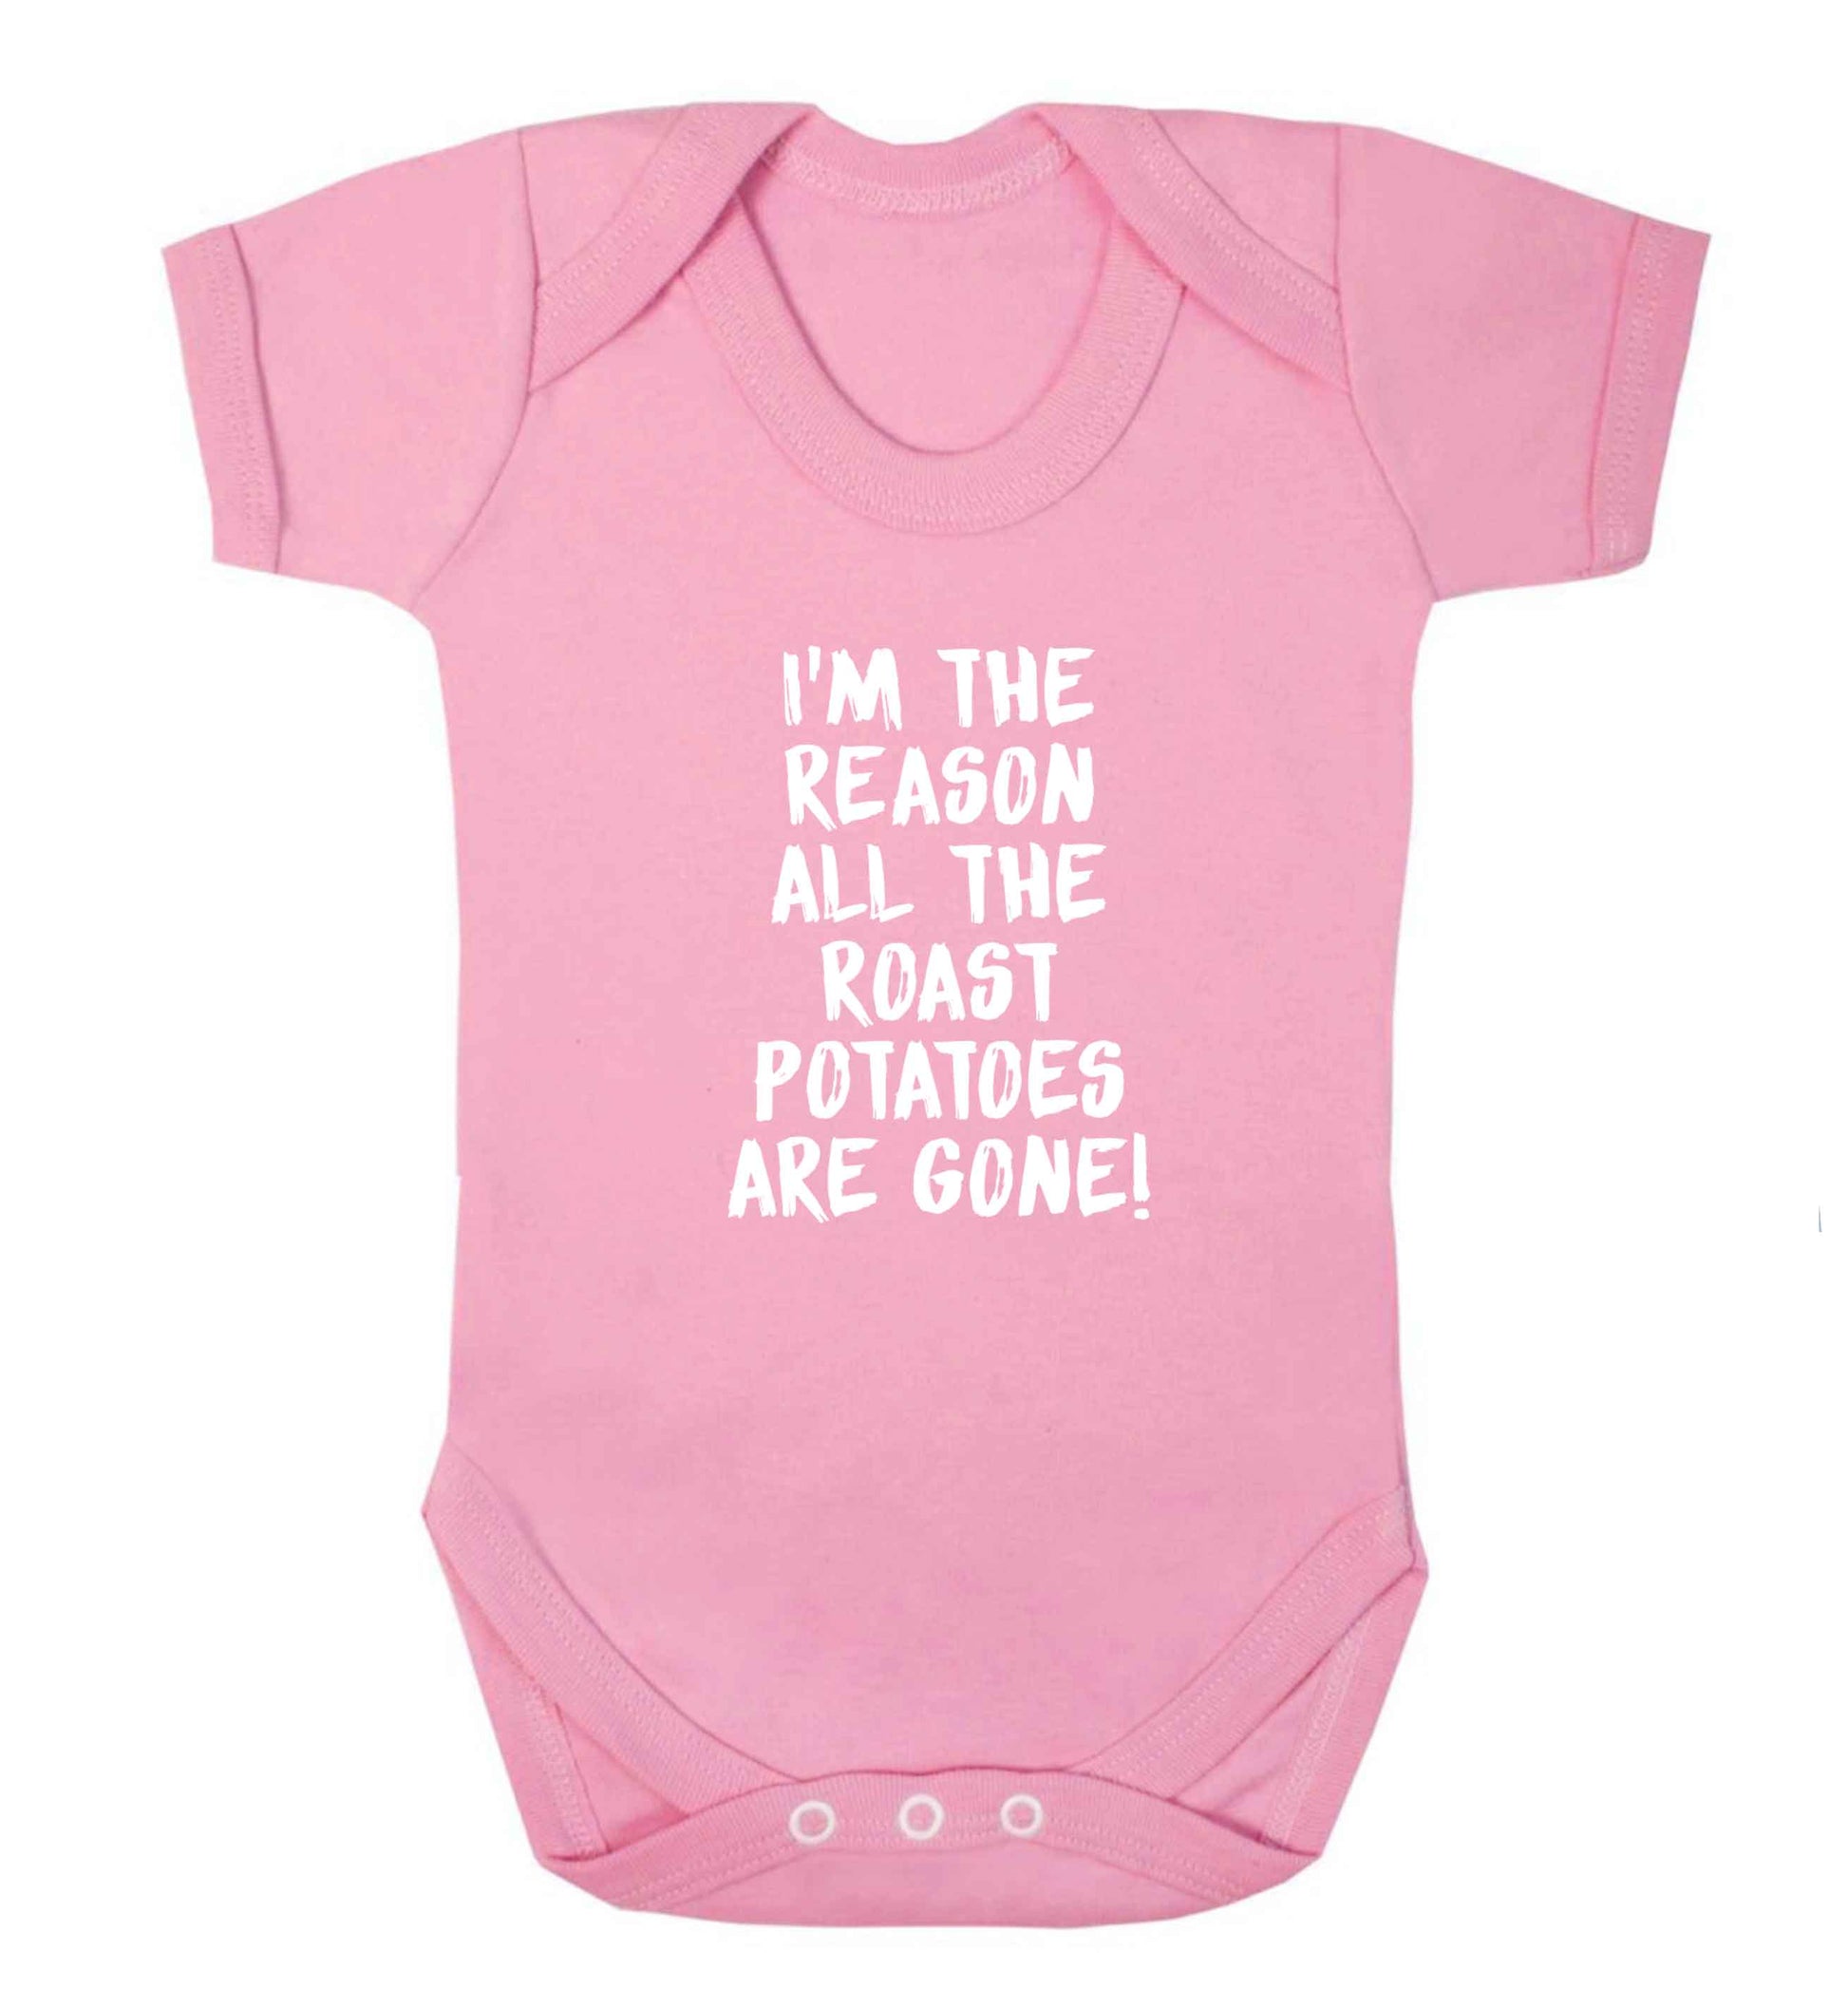 I'm the reason all the roast potatoes are gone baby vest pale pink 18-24 months